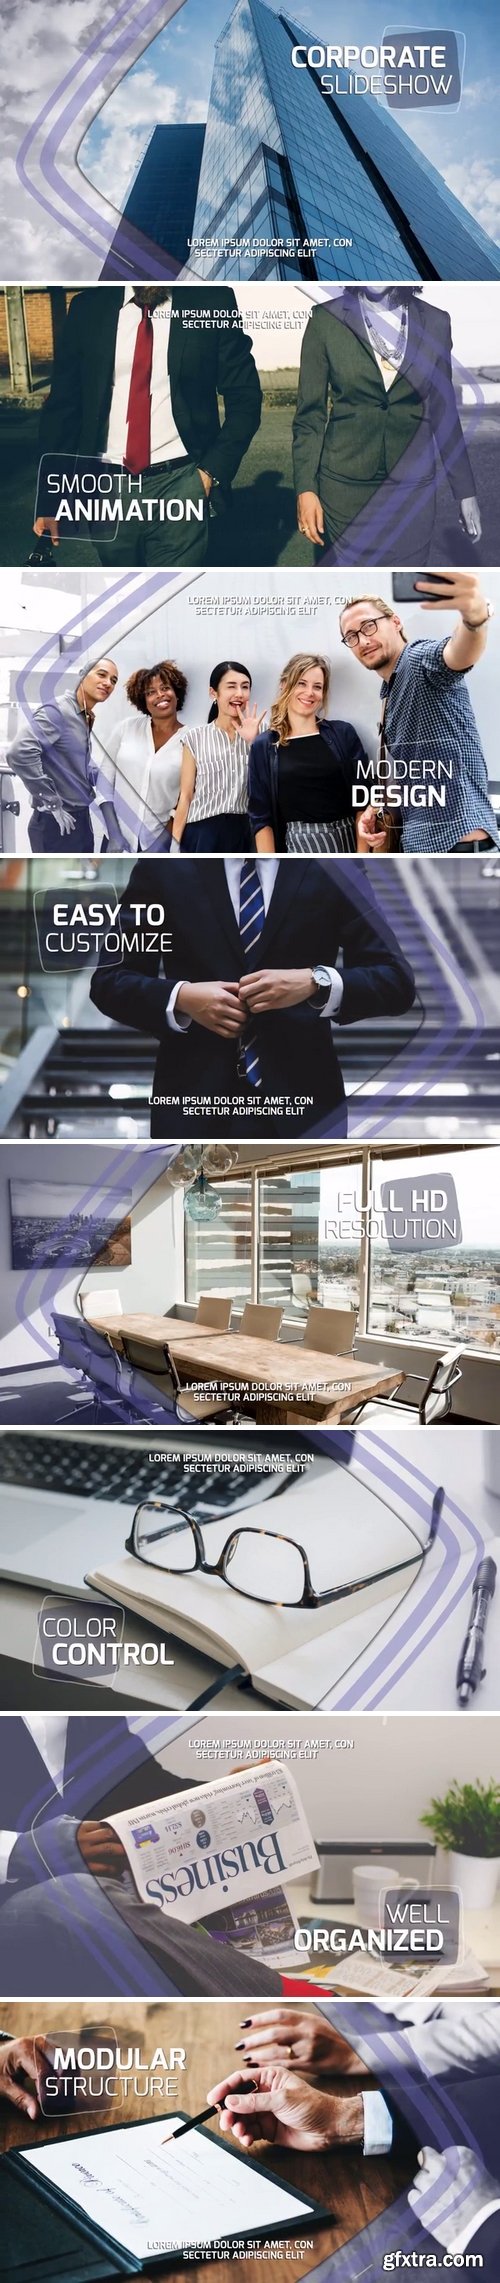 MA - Corporate Slideshow After Effects Templates 157328